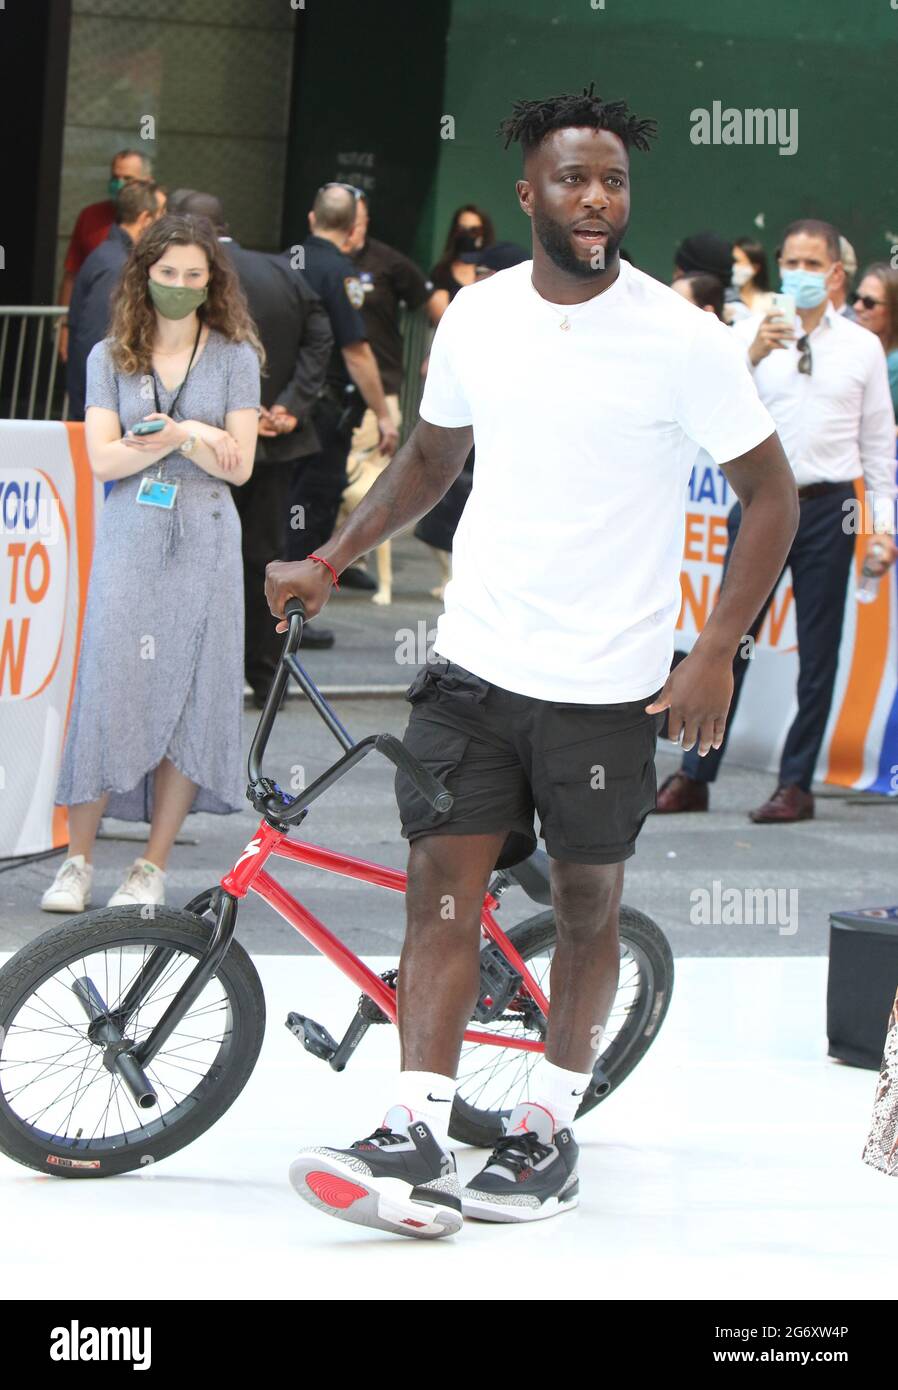 BMX Icon Nigel Sylvester Hits NYC to Celebrate World Bicycle Day